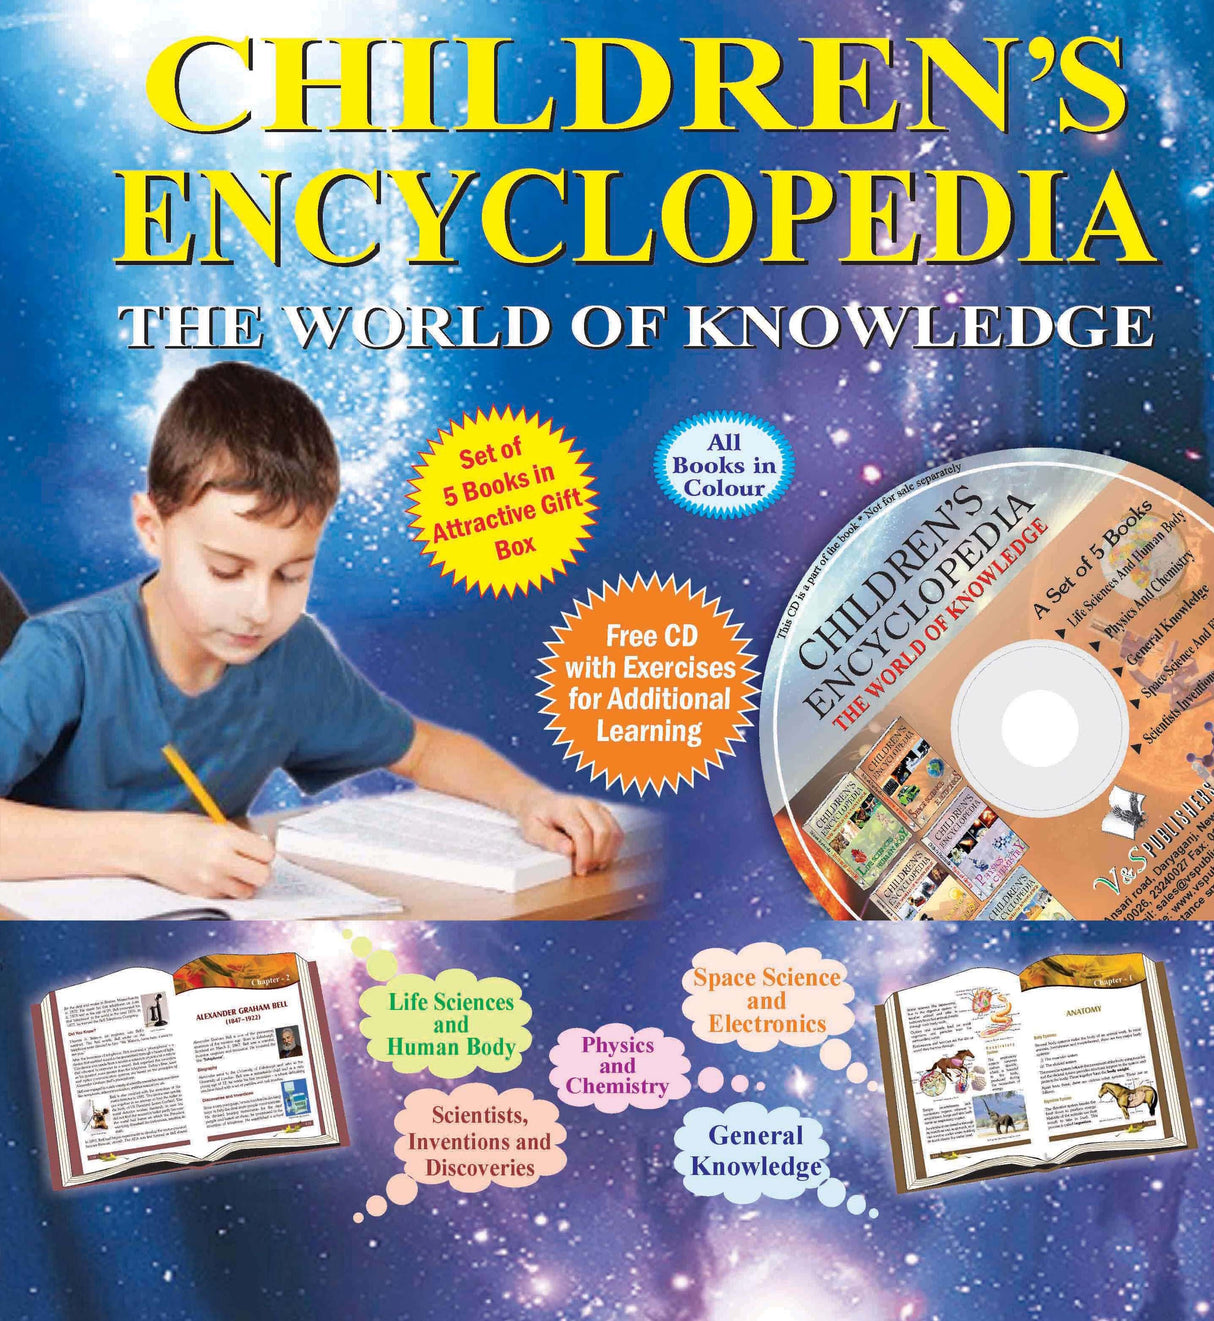 Children's Encyclopedia - The World Of Knowledge (With Dropbox): Familiarising children with the general worldly knowledge